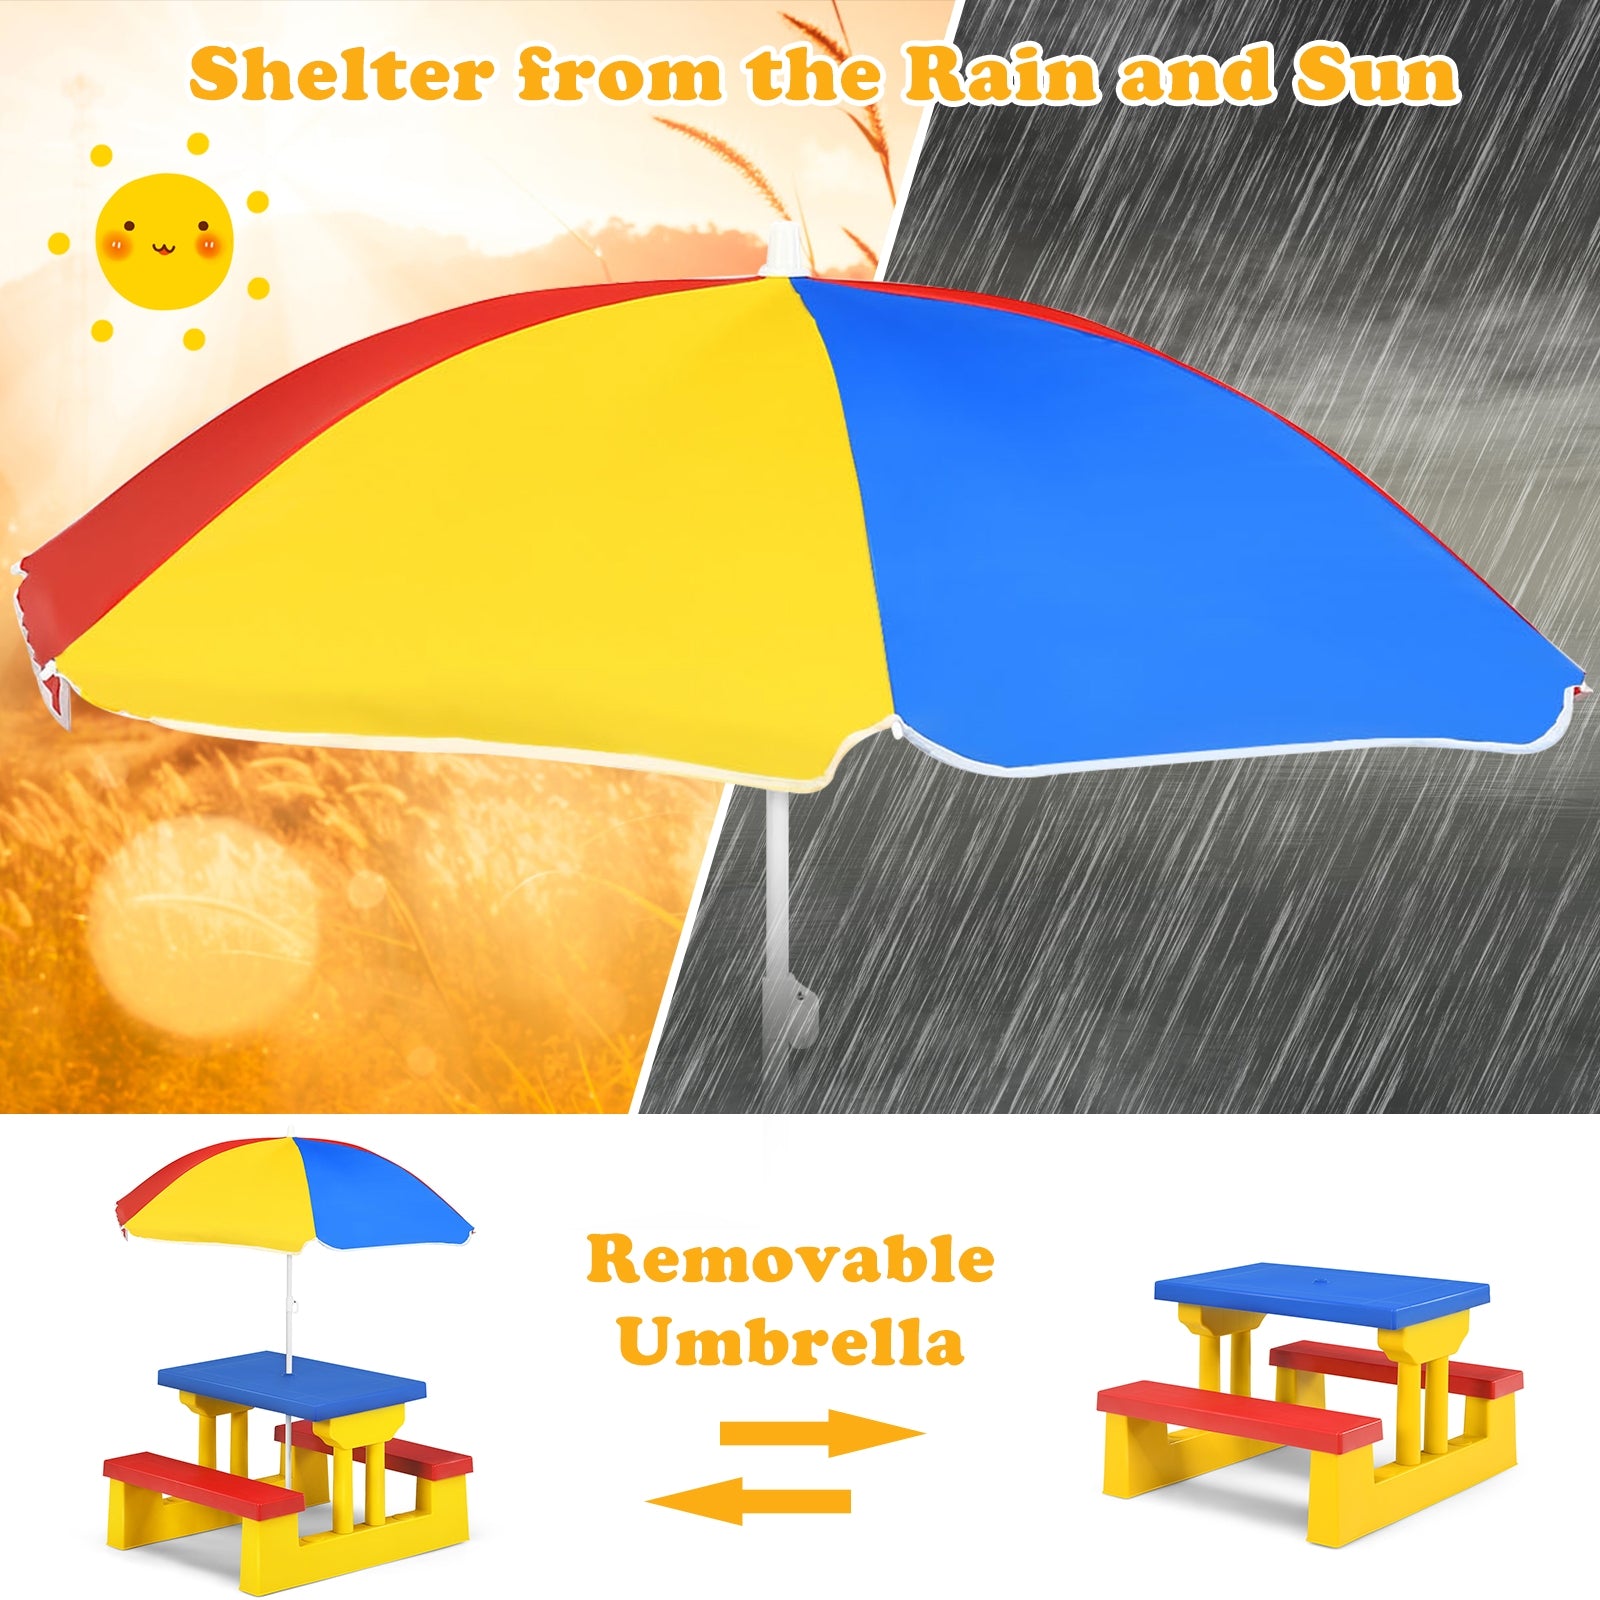 Removable Folding Umbrella Canopy:  Providing protection from rain and harmful UV rays when used outdoors. When the umbrella is removed, the table can be conveniently moved indoors, serving as a workspace for activities such as art, crafts, and games.